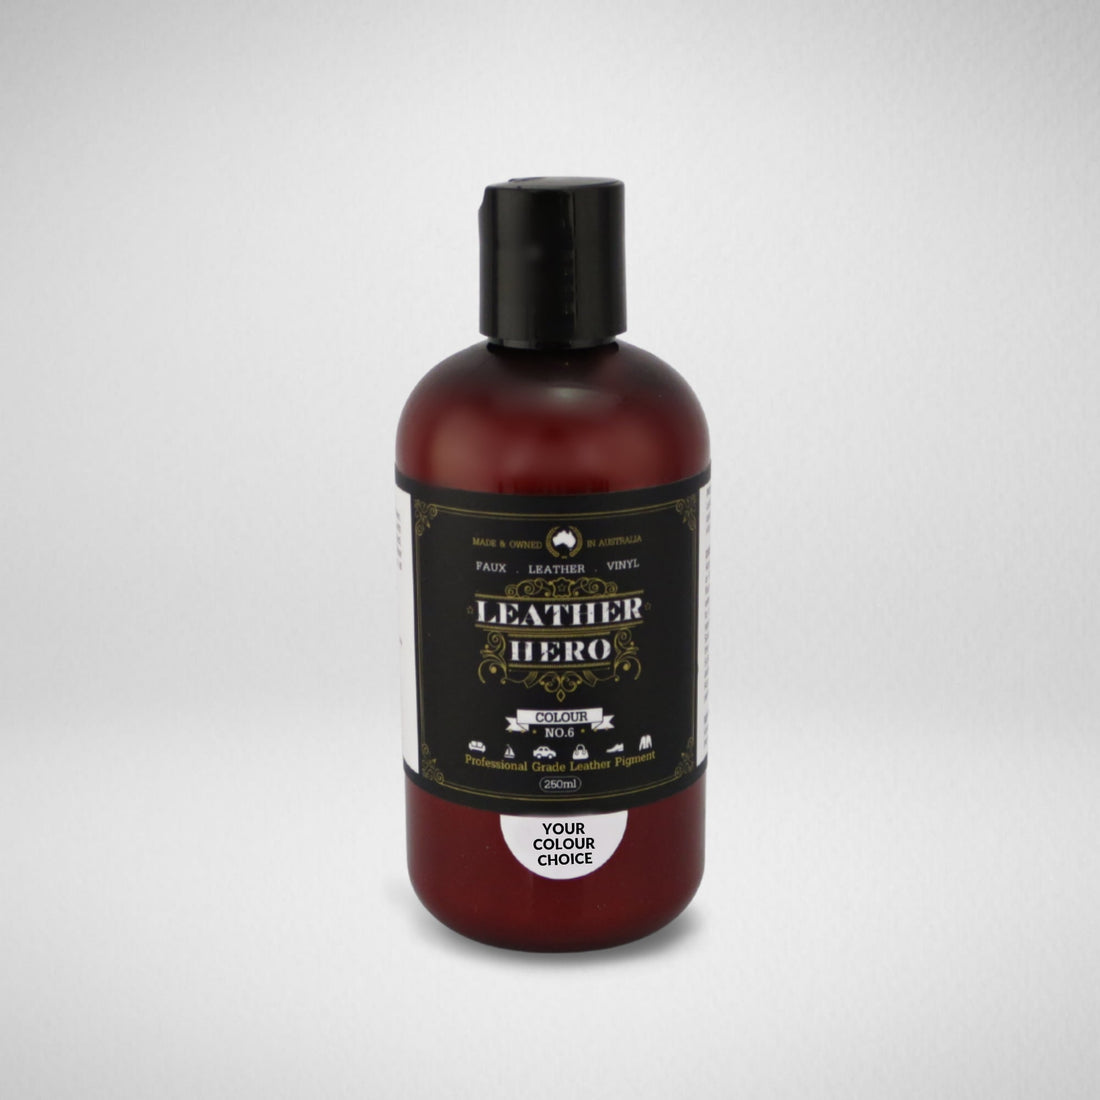 Leather Paint - Aniline Golden Leather Repair & Recolouring Leather Hero Australia